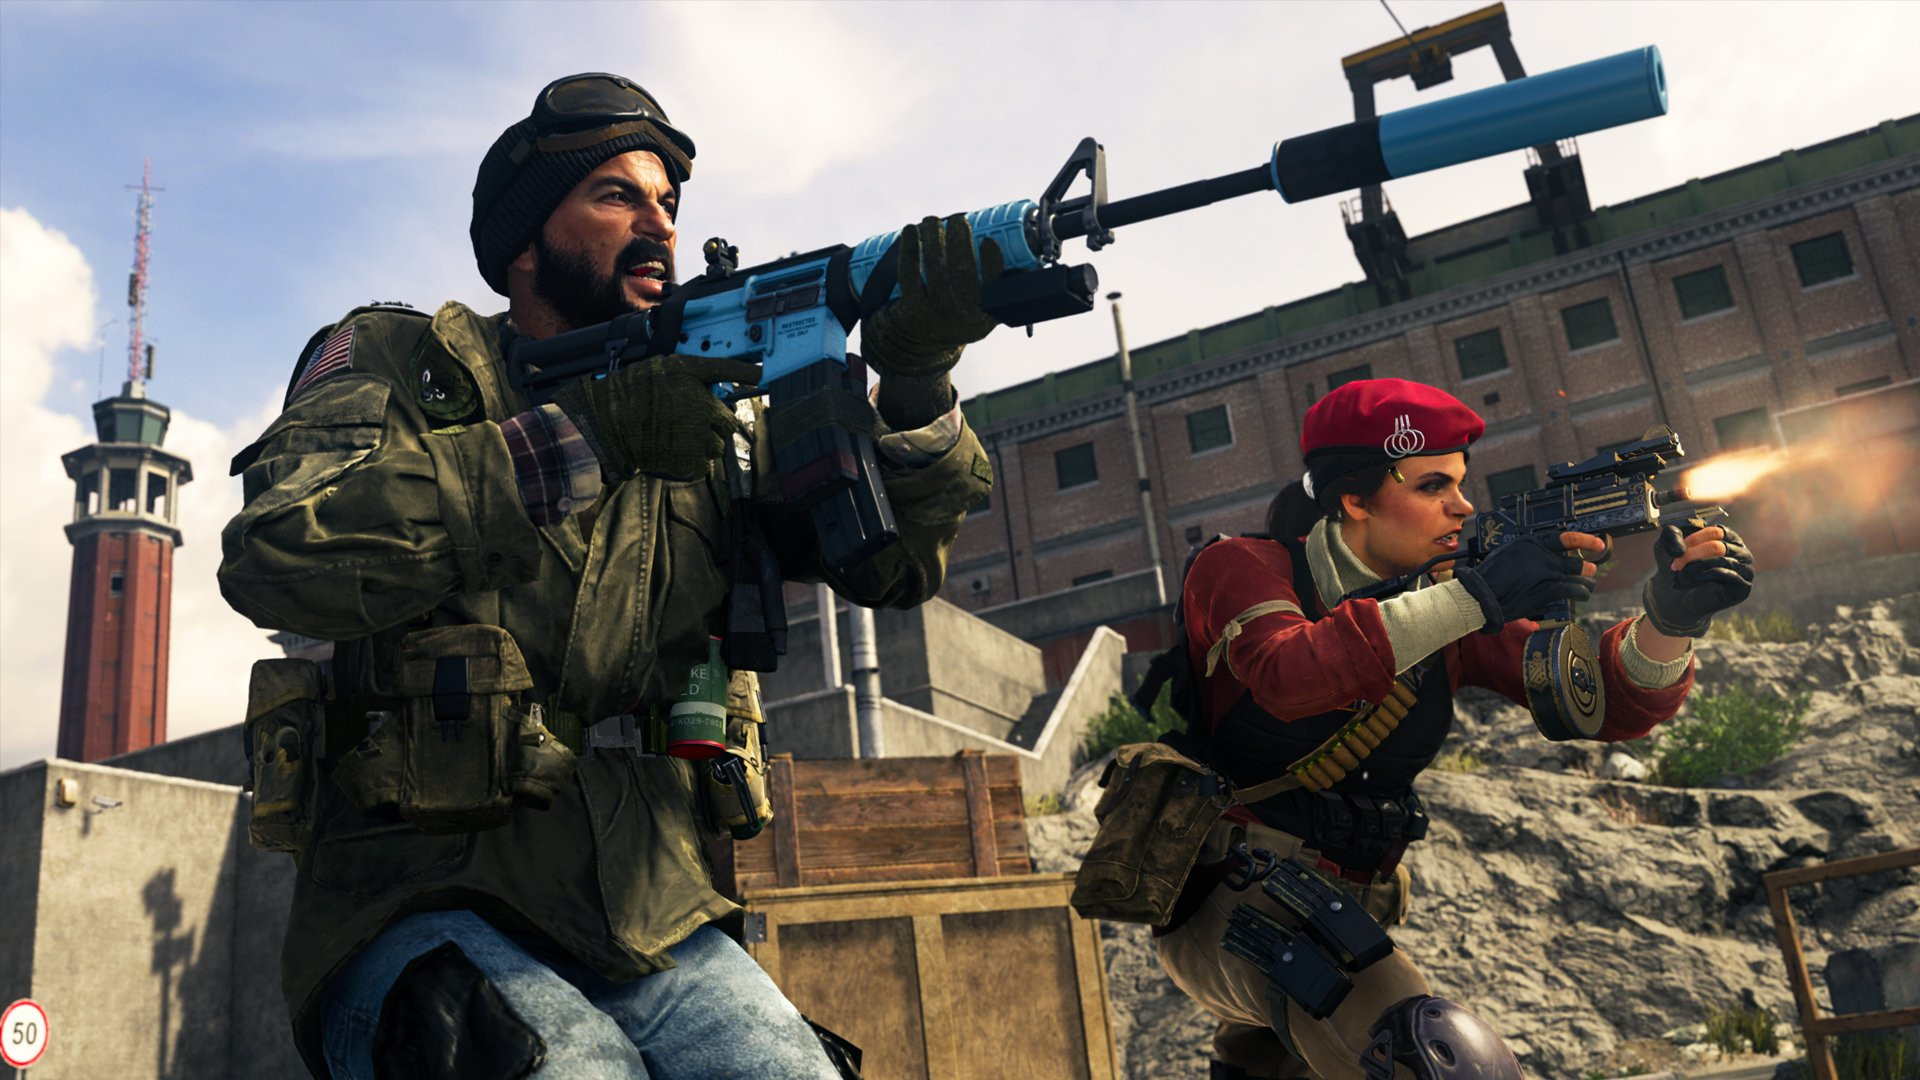 Free shooting games: Call of Duty: Warzone. A screenshot shows two Warzone operators fighting side by side on Rebirth Island.